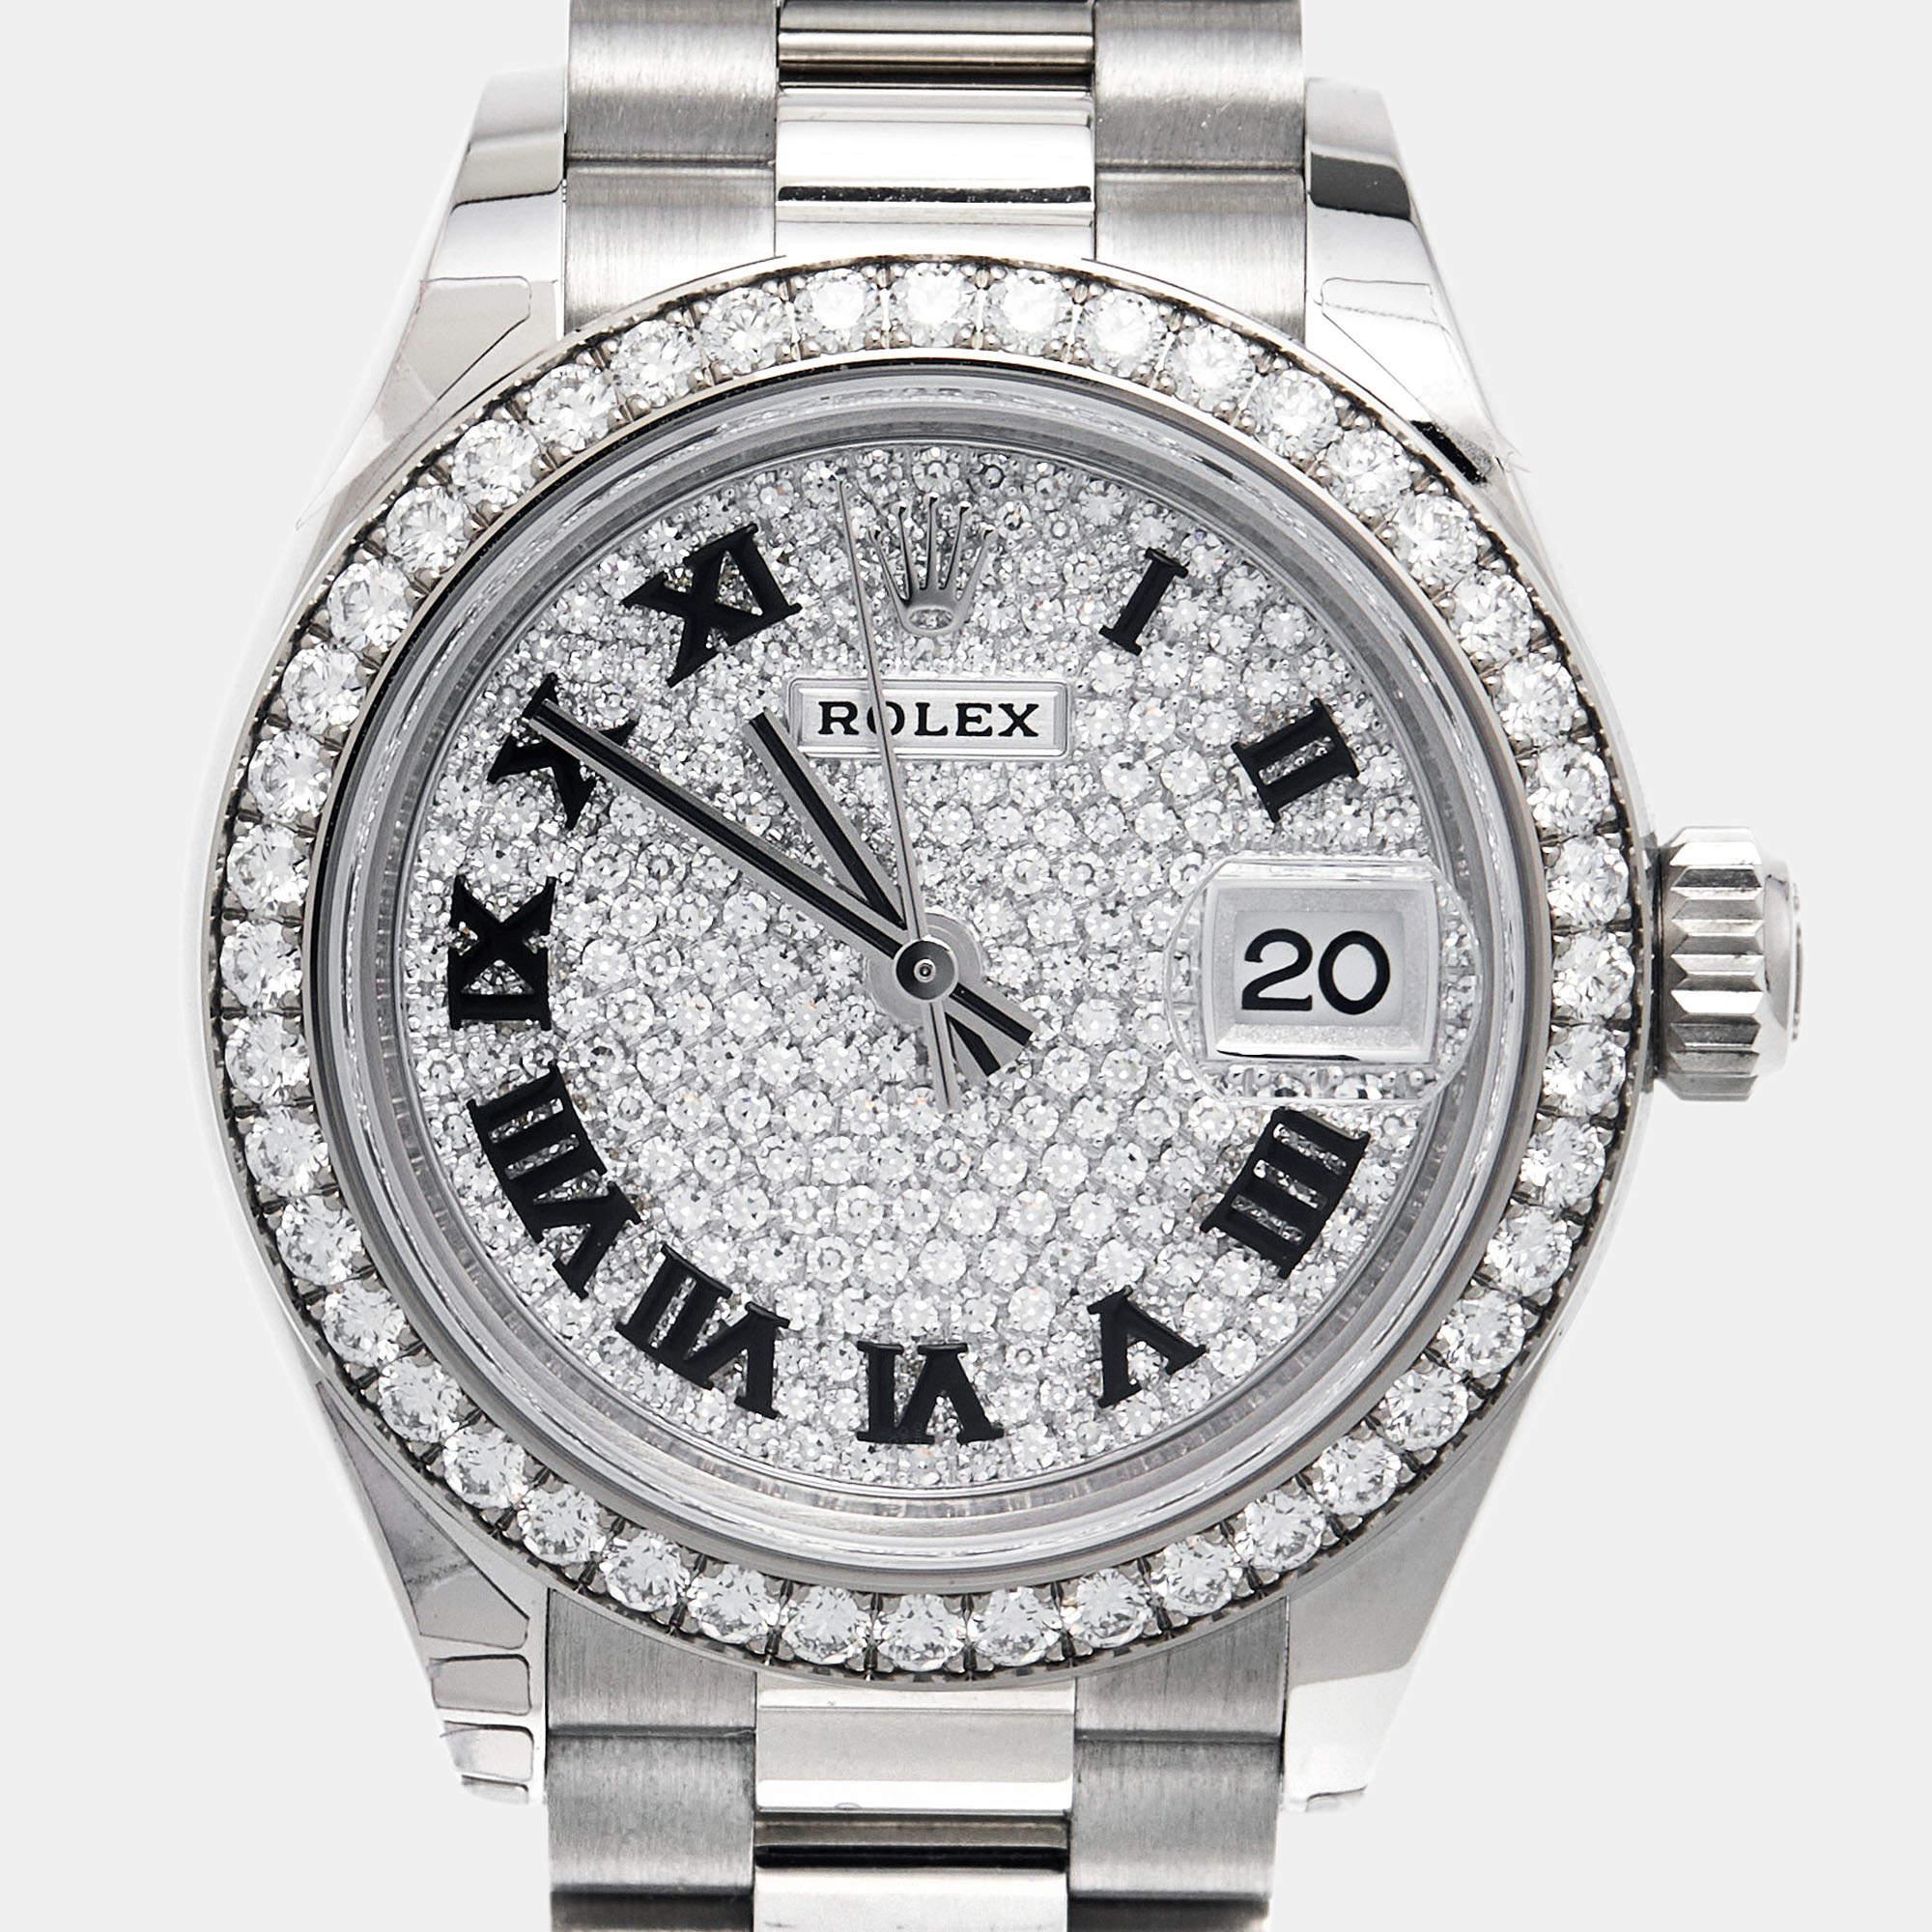 An expression of timeless beauty and an example of luxury, the Rolex Datejust is rightly one of the most coveted timepieces in the world. Crafted fully in 18k white gold, this Rolex Datejust M279139RBR-0014 wristwatch, with its classy profile,